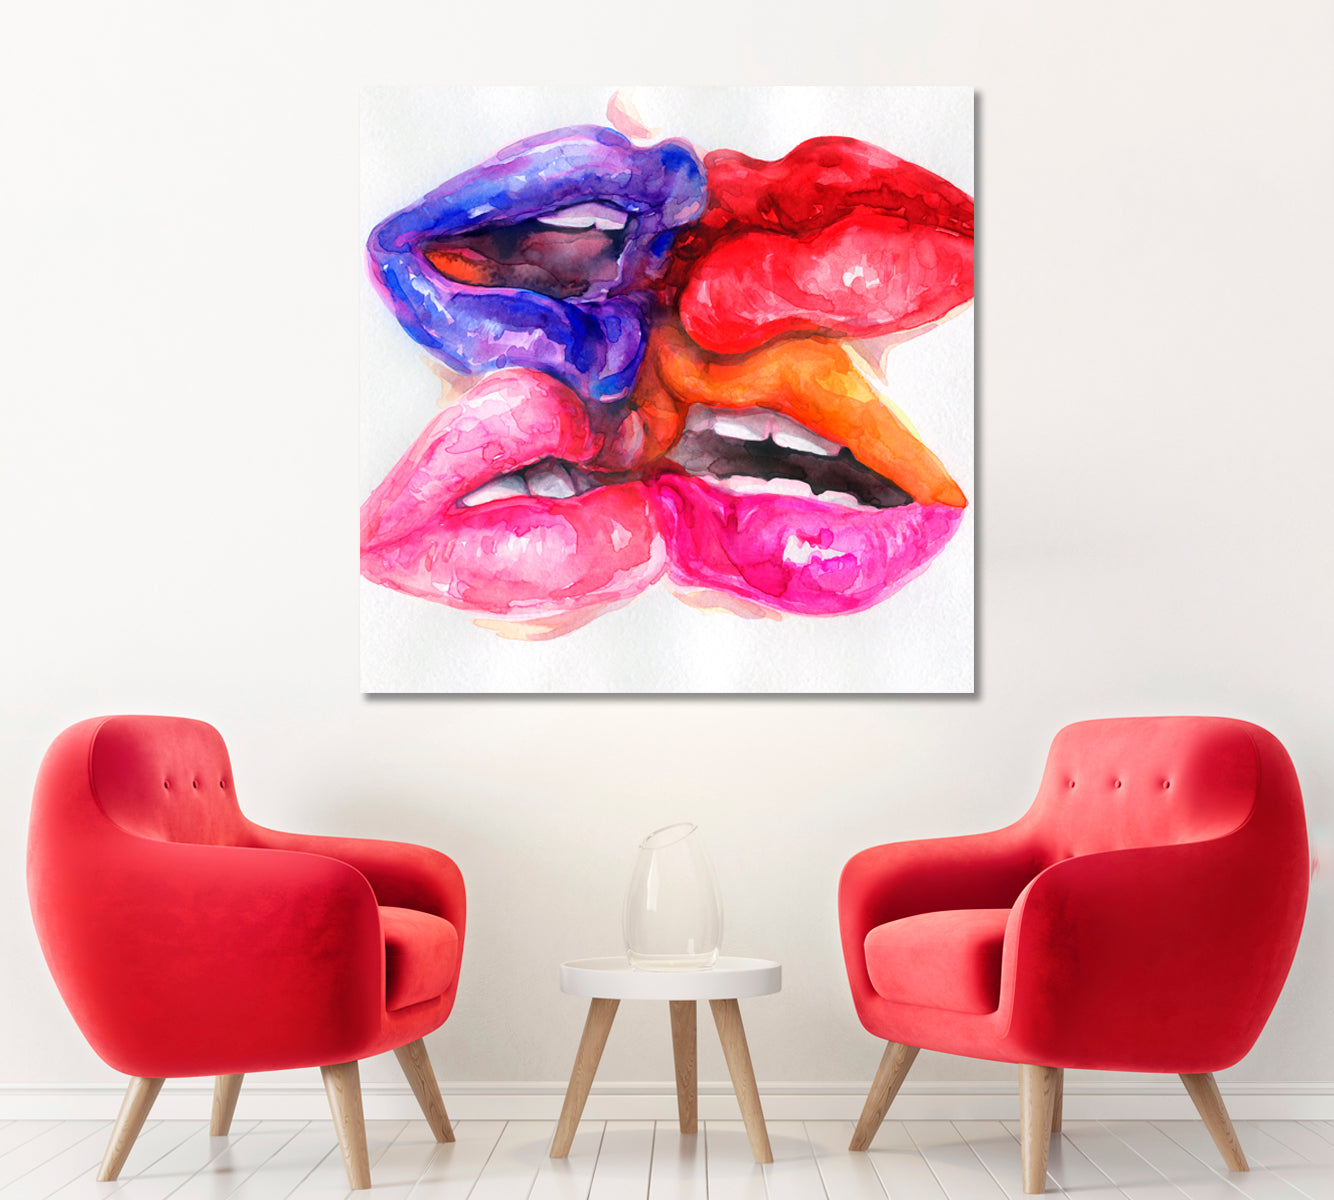 Colorful Lips Canvas Print ArtLexy   